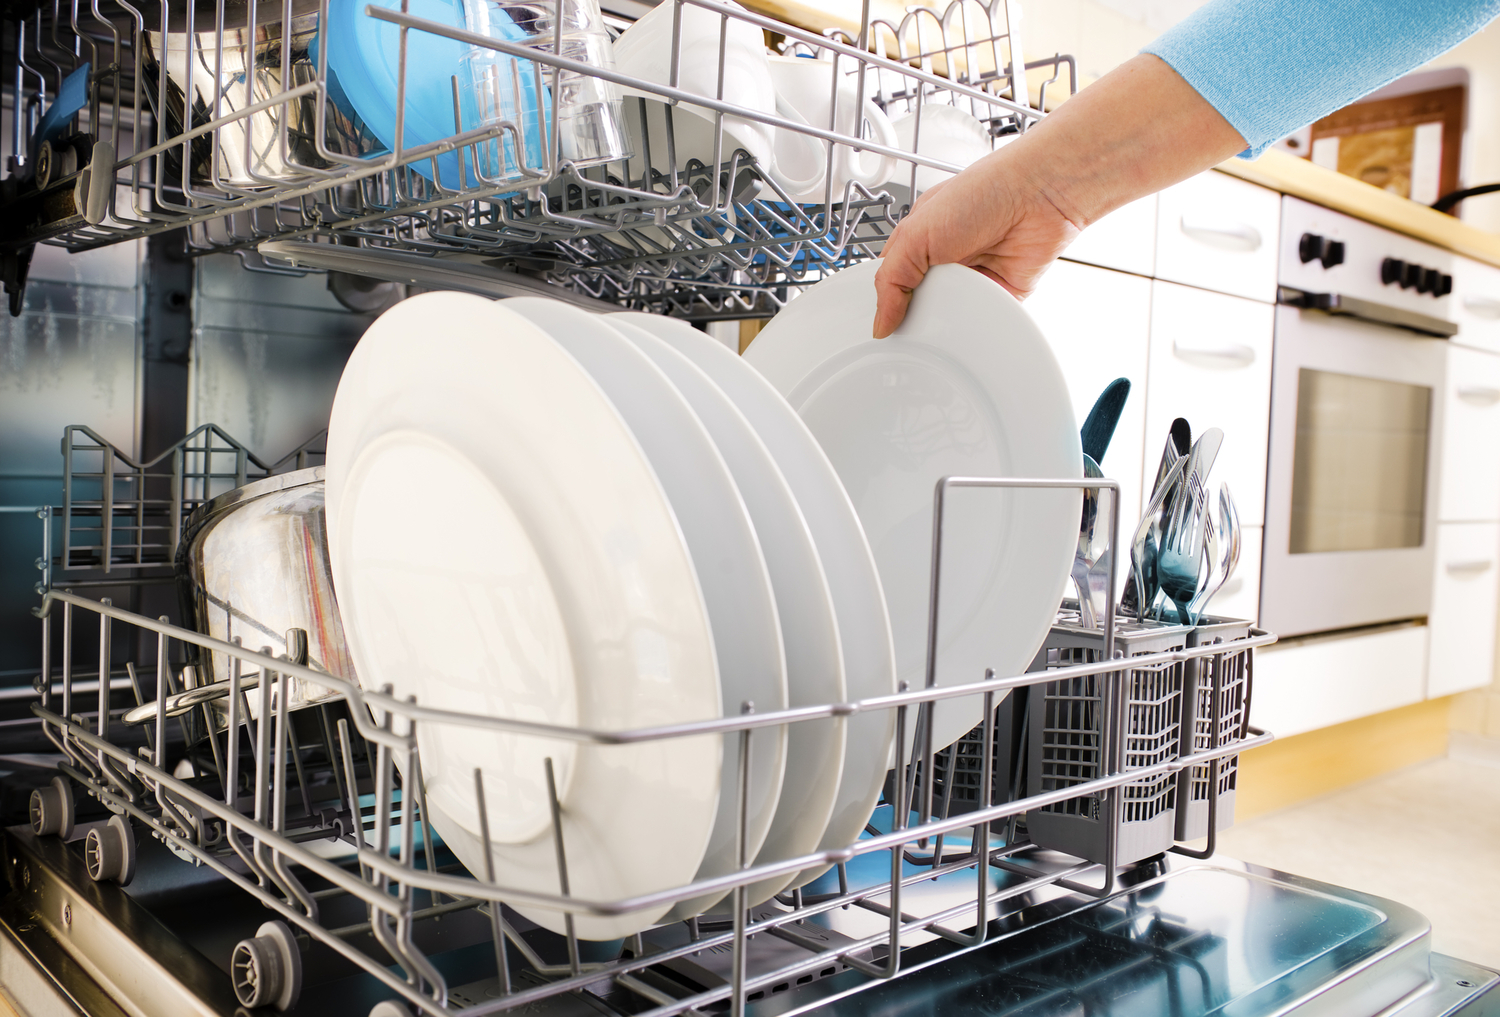 Save money by making your own dishwasher tablets